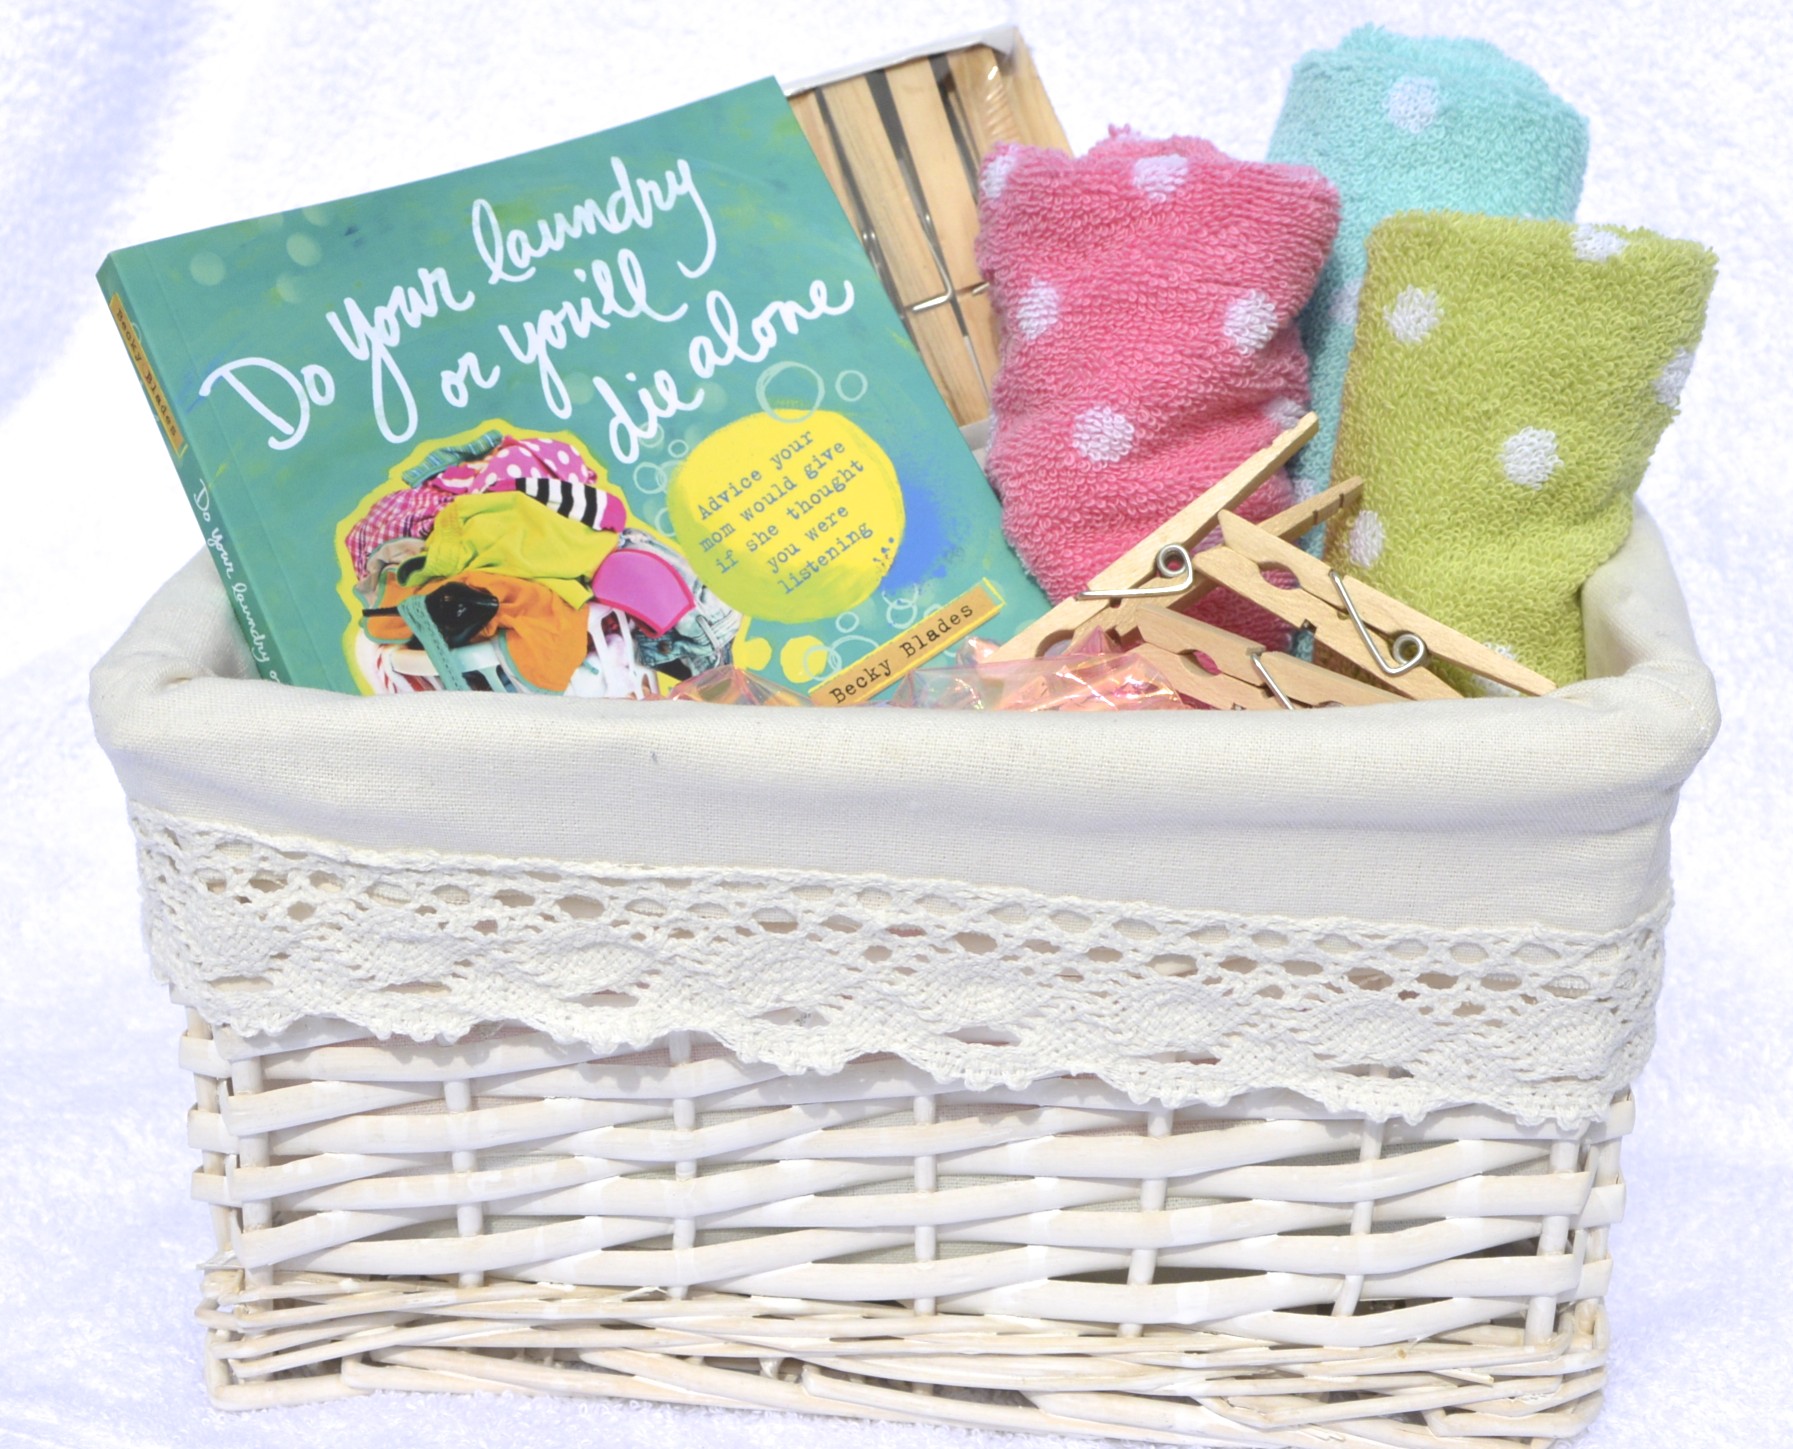 do your laundry or you'll die alone book in pretty laundry basket with towels and clothespins